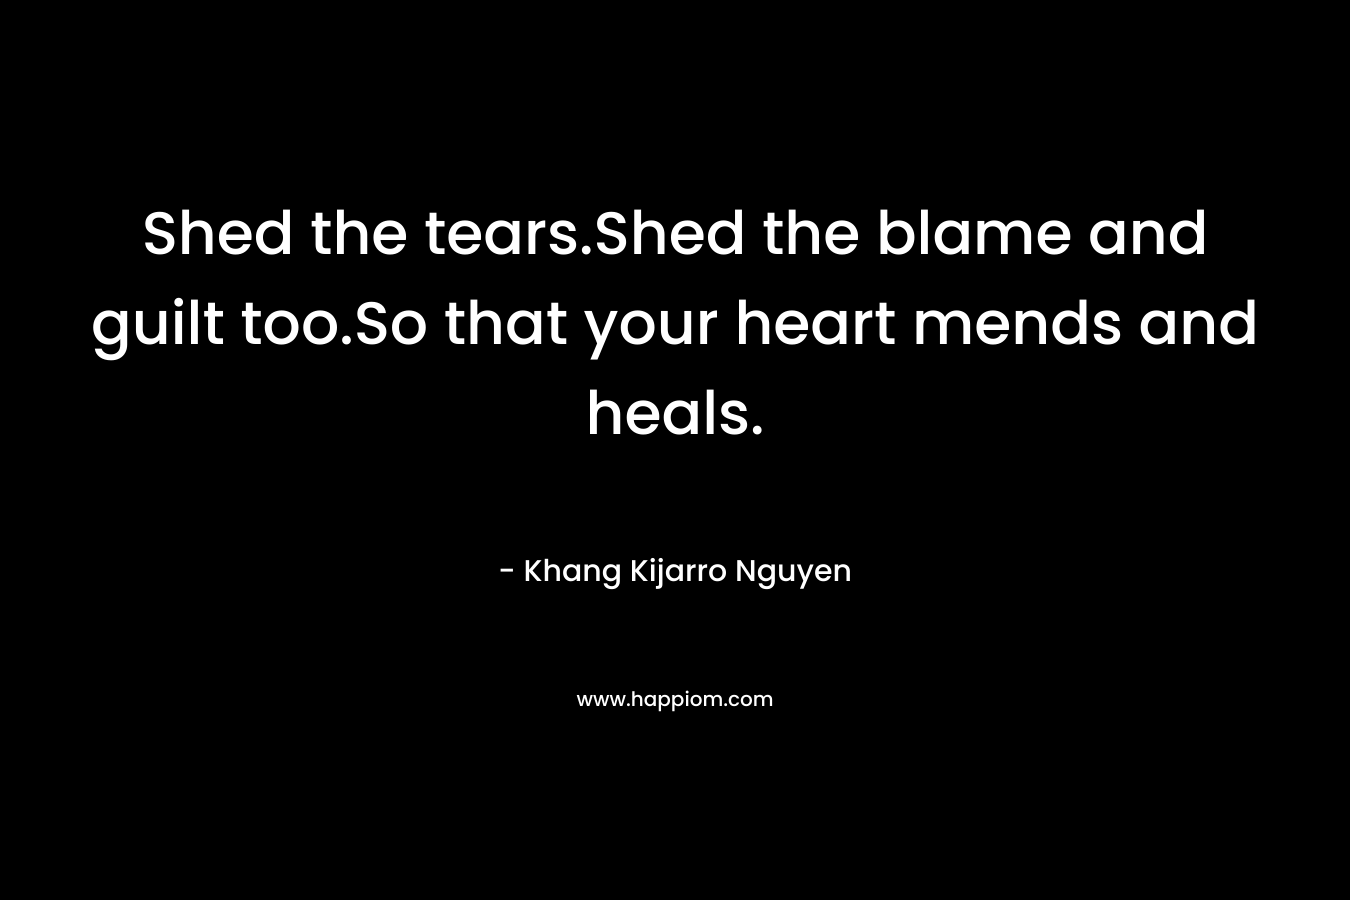 Shed the tears.Shed the blame and guilt too.So that your heart mends and heals. – Khang Kijarro Nguyen